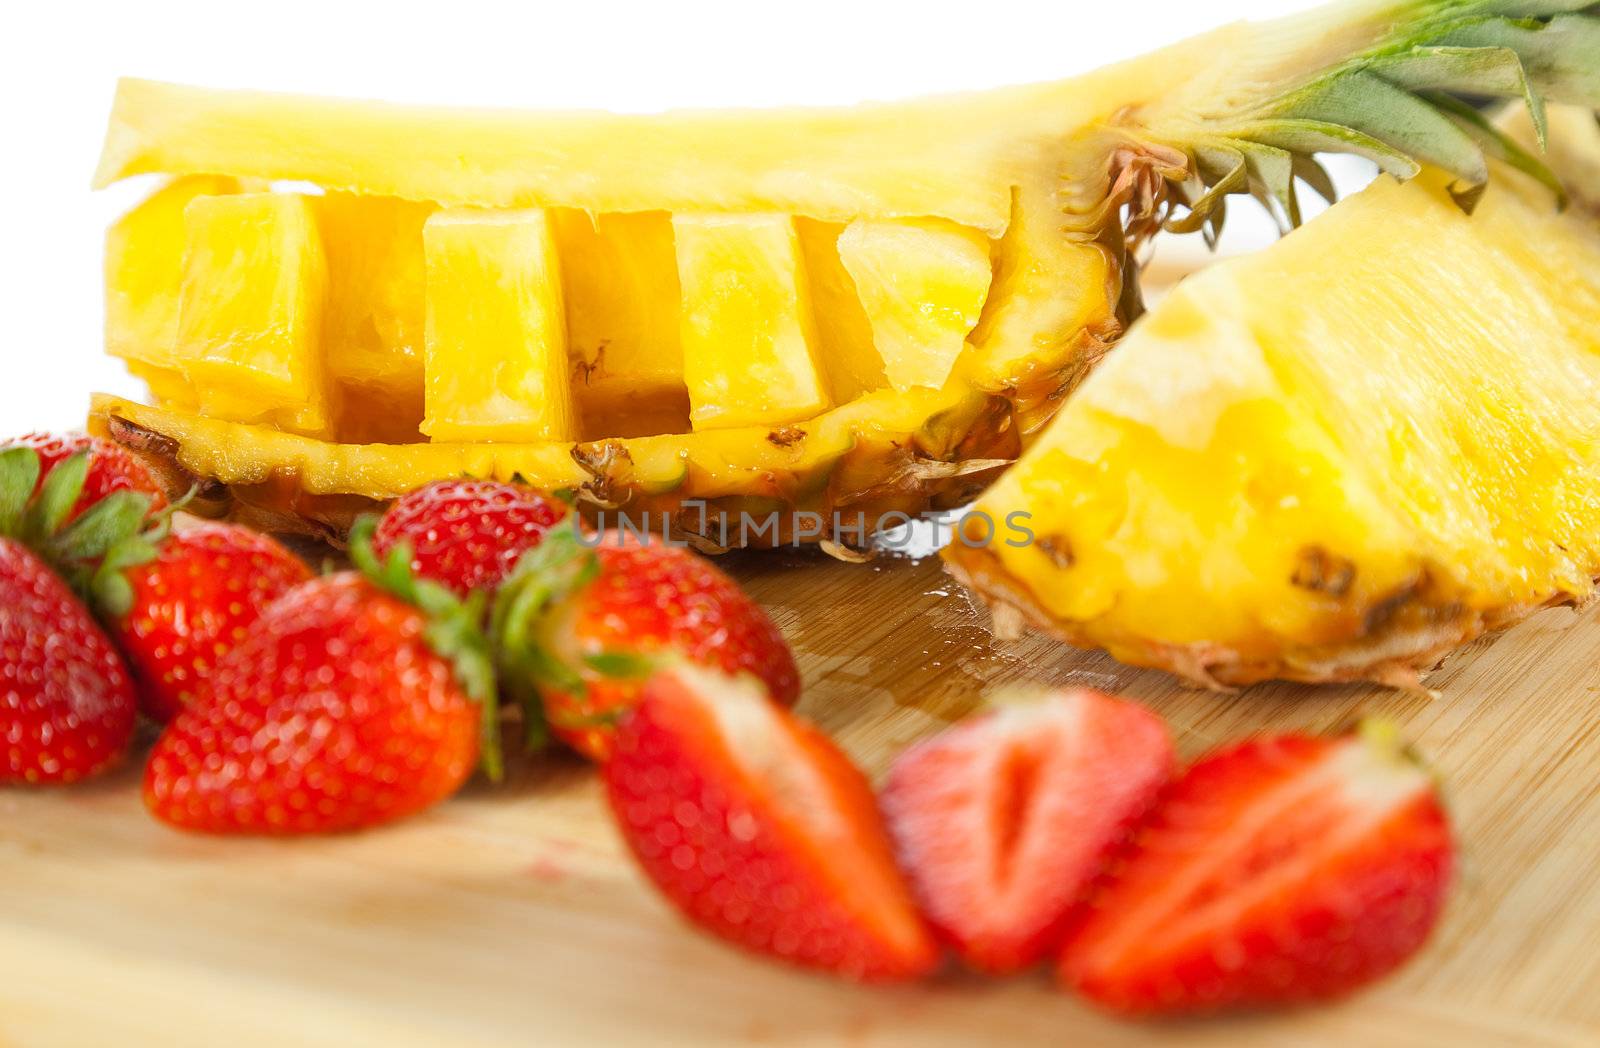 CLose-up of slices fresh strawberries and pineapple on wooden cutting board